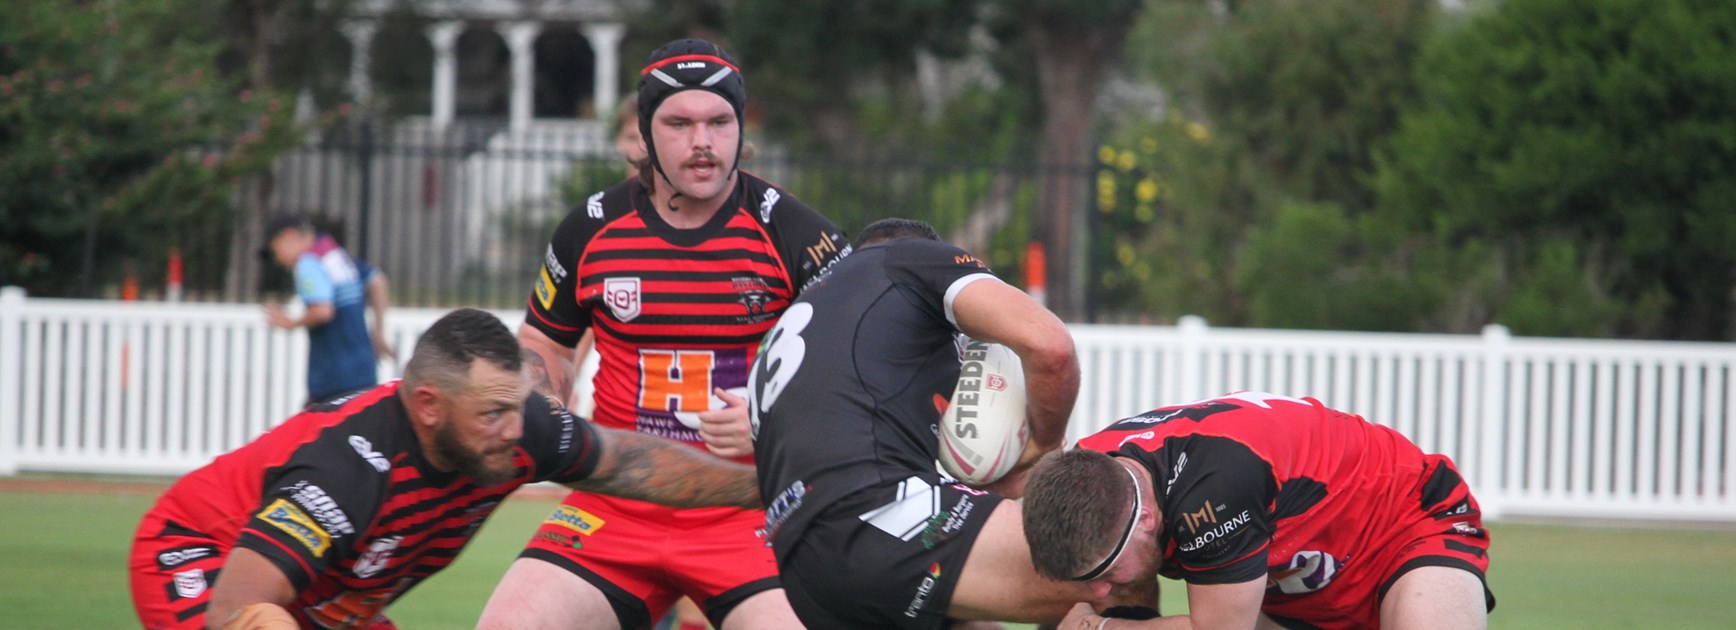 Bundaberg A grade preview: Family ties create Panthers history